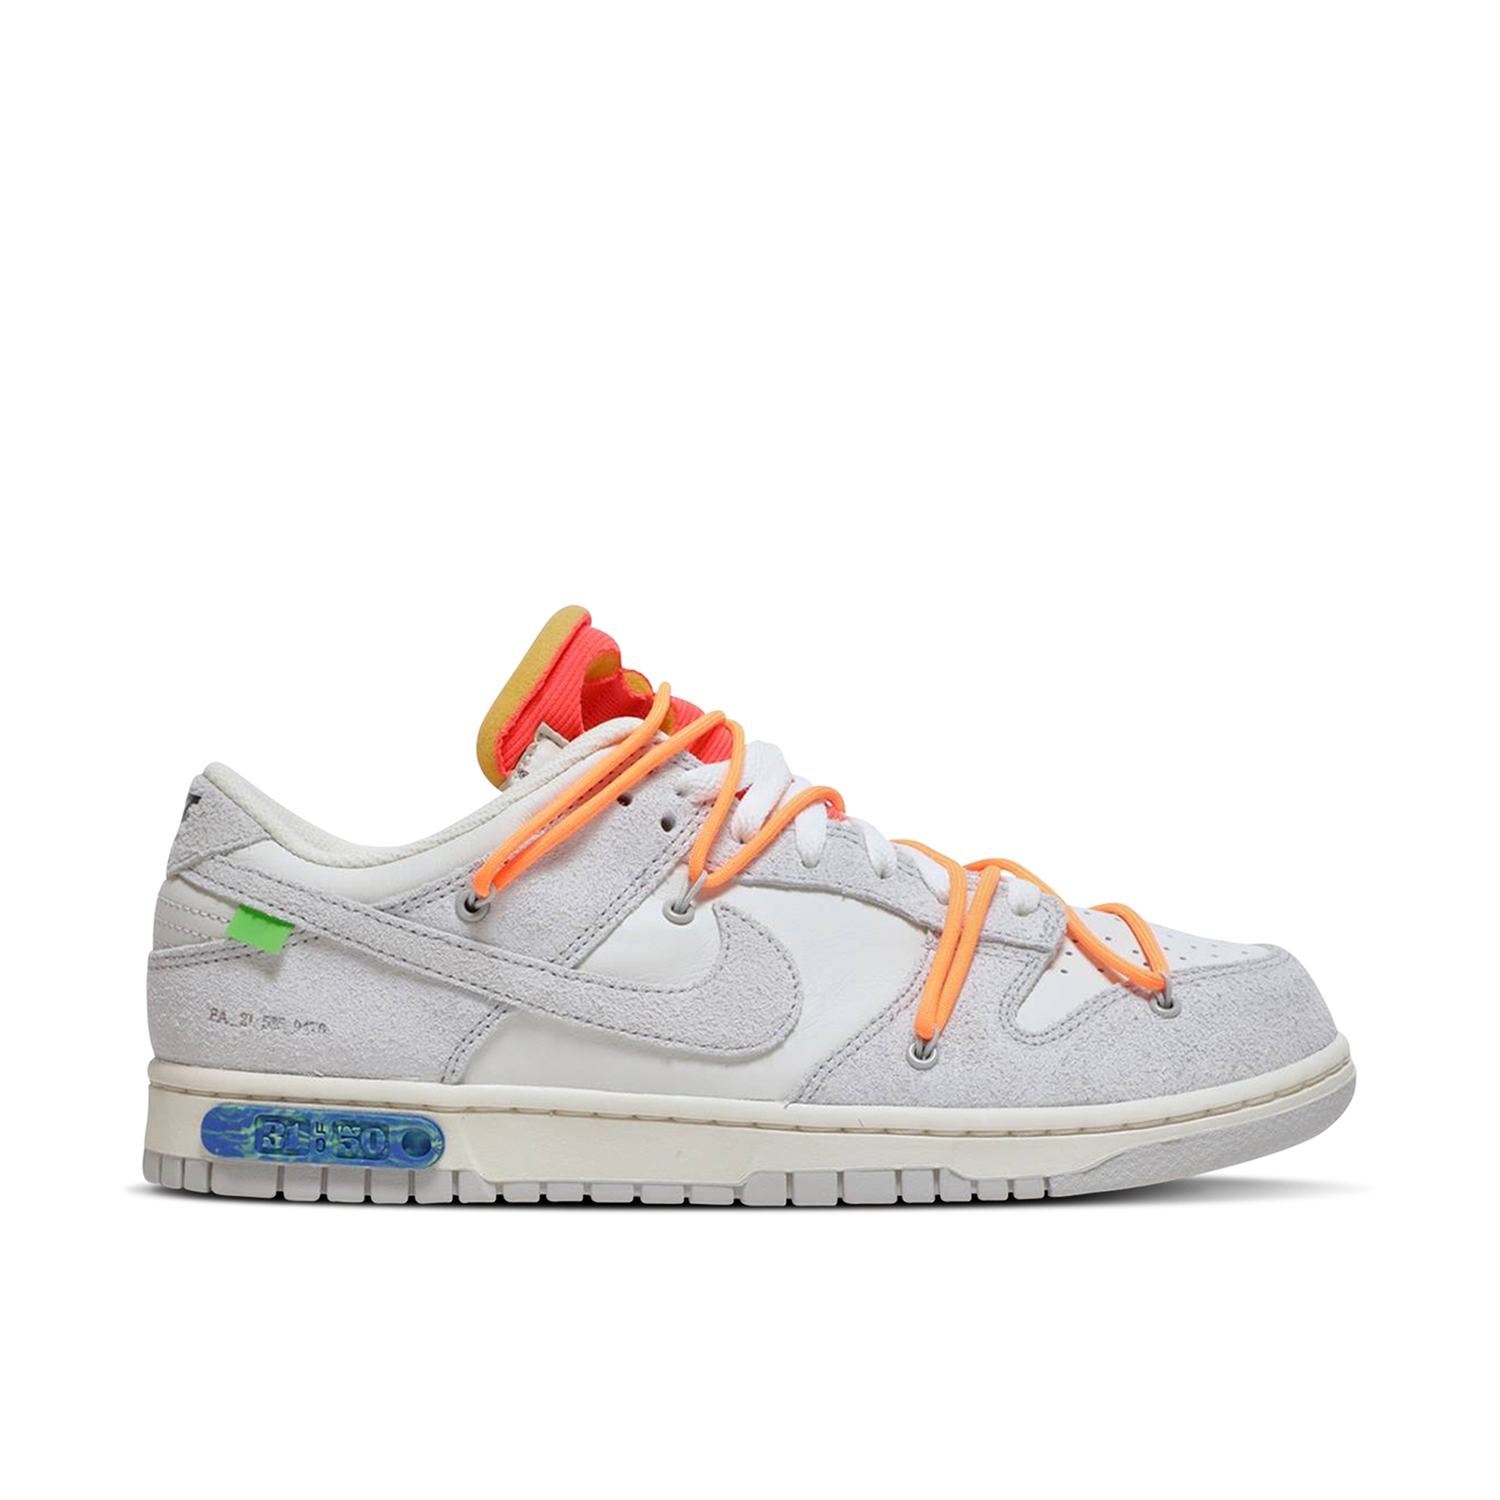 Off-White x Nike Dunk Low Dear Summer - 45 of 50 | DM1602-101 | Laced